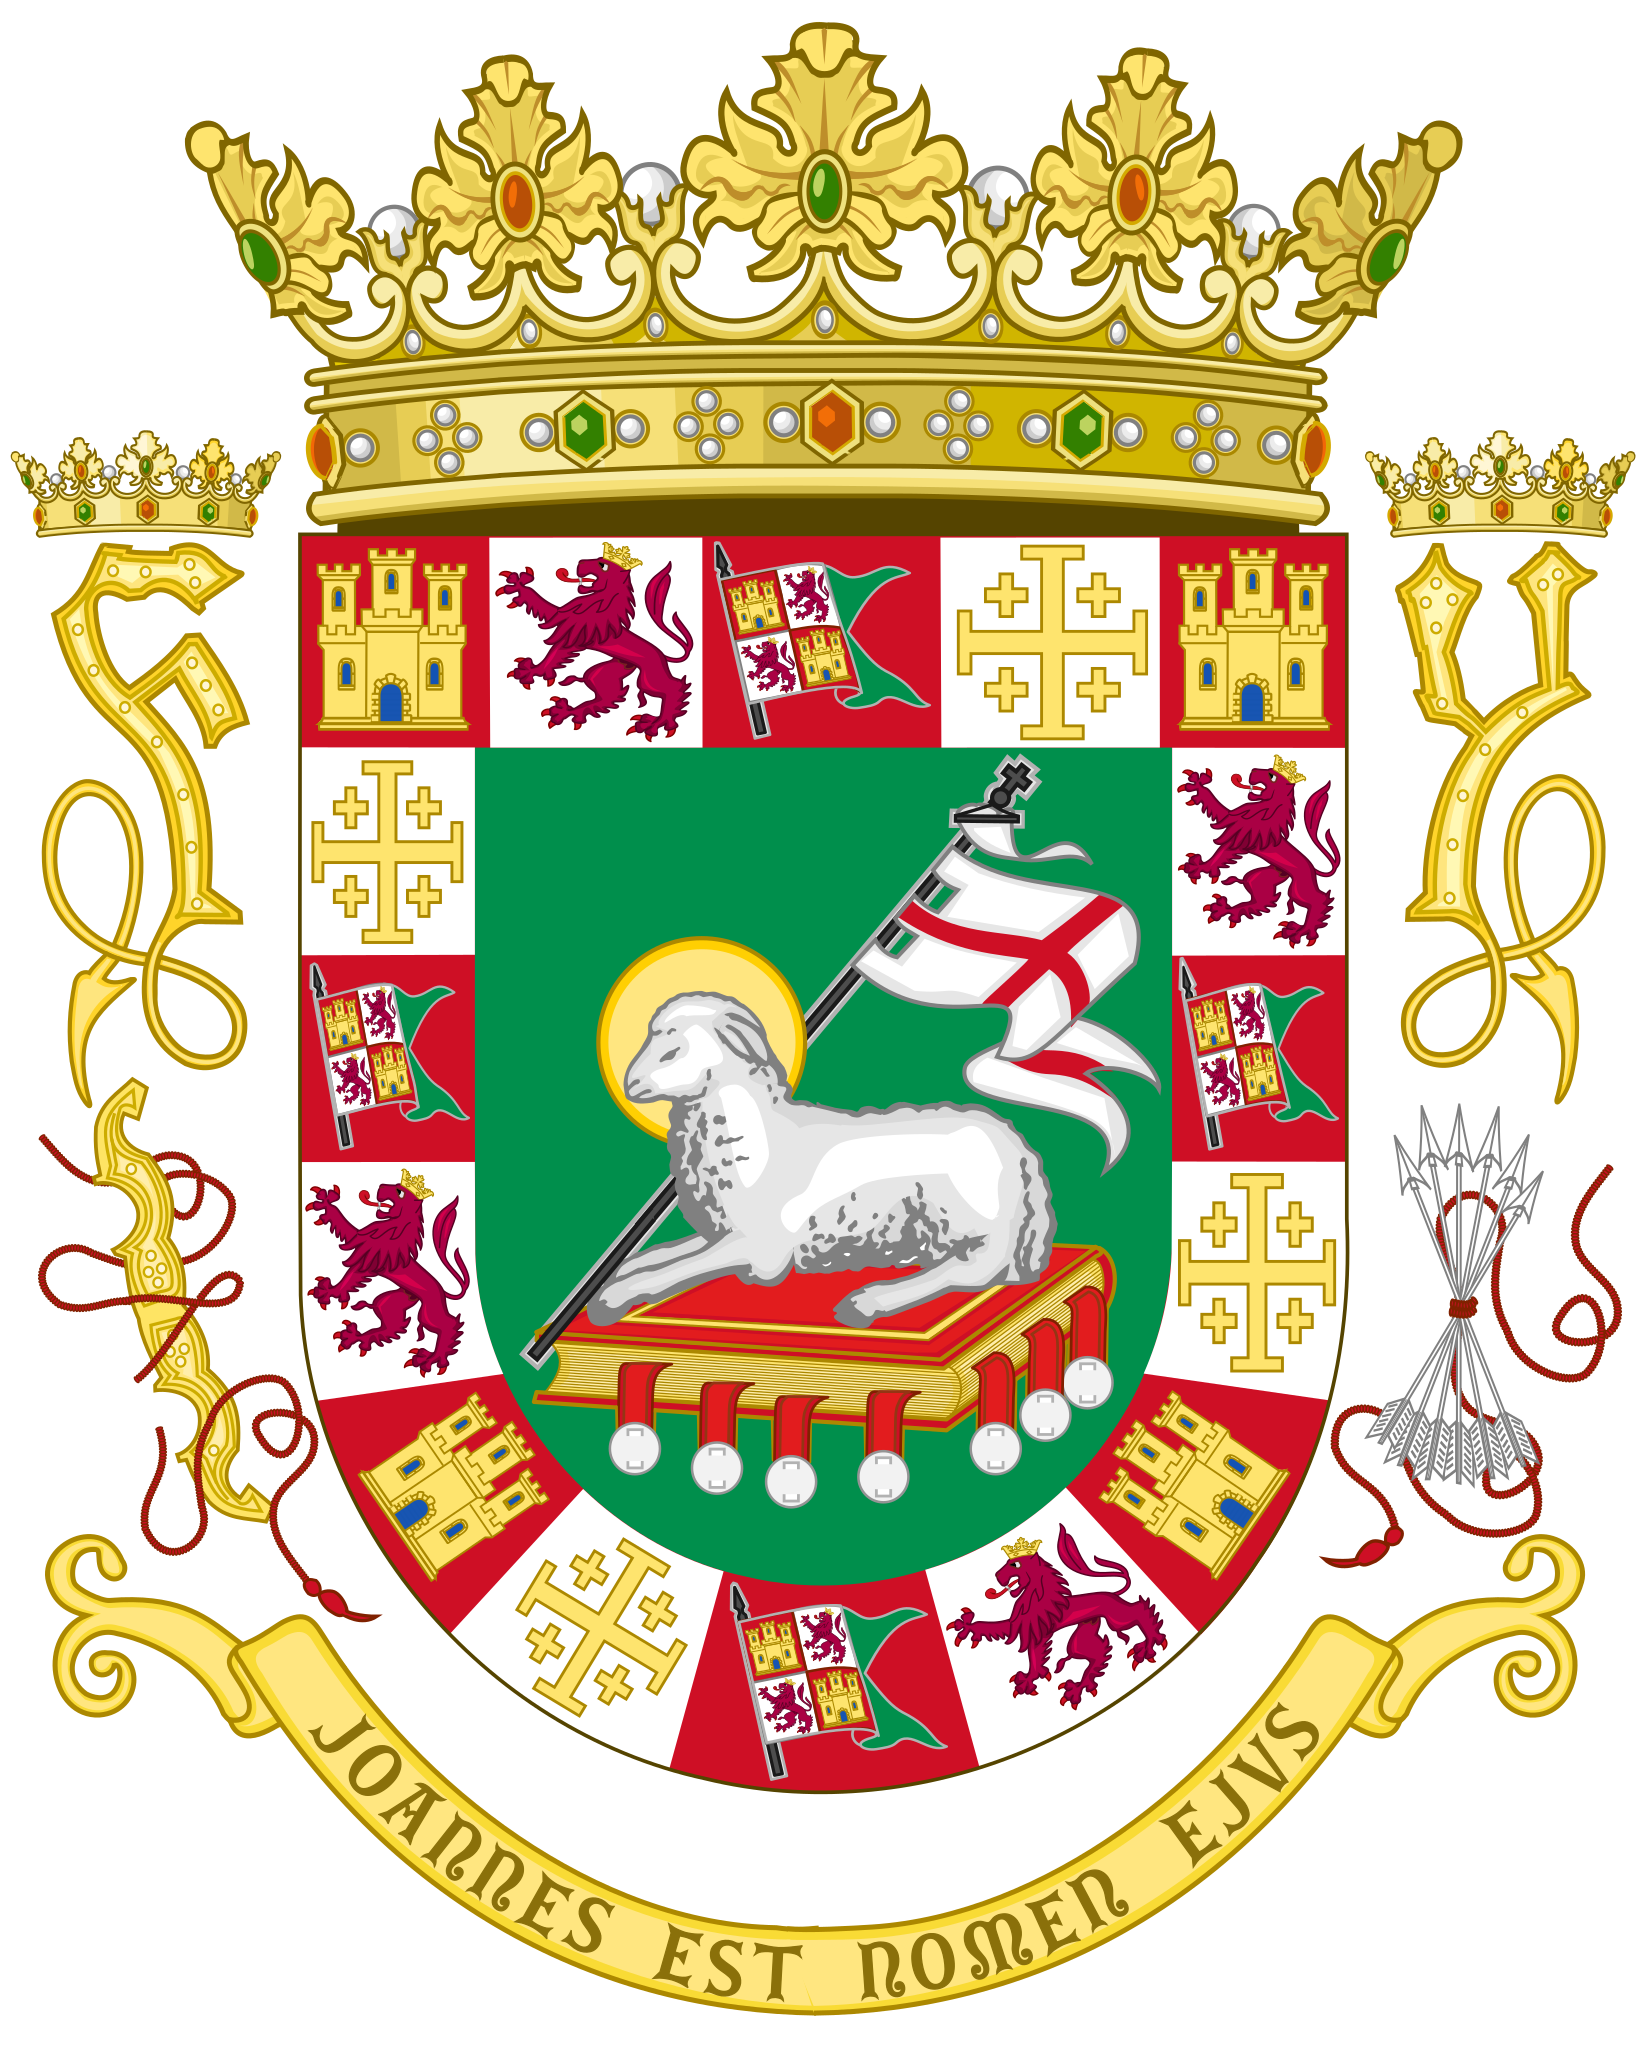 Coat of arms of Commonwealth of Puerto Rico